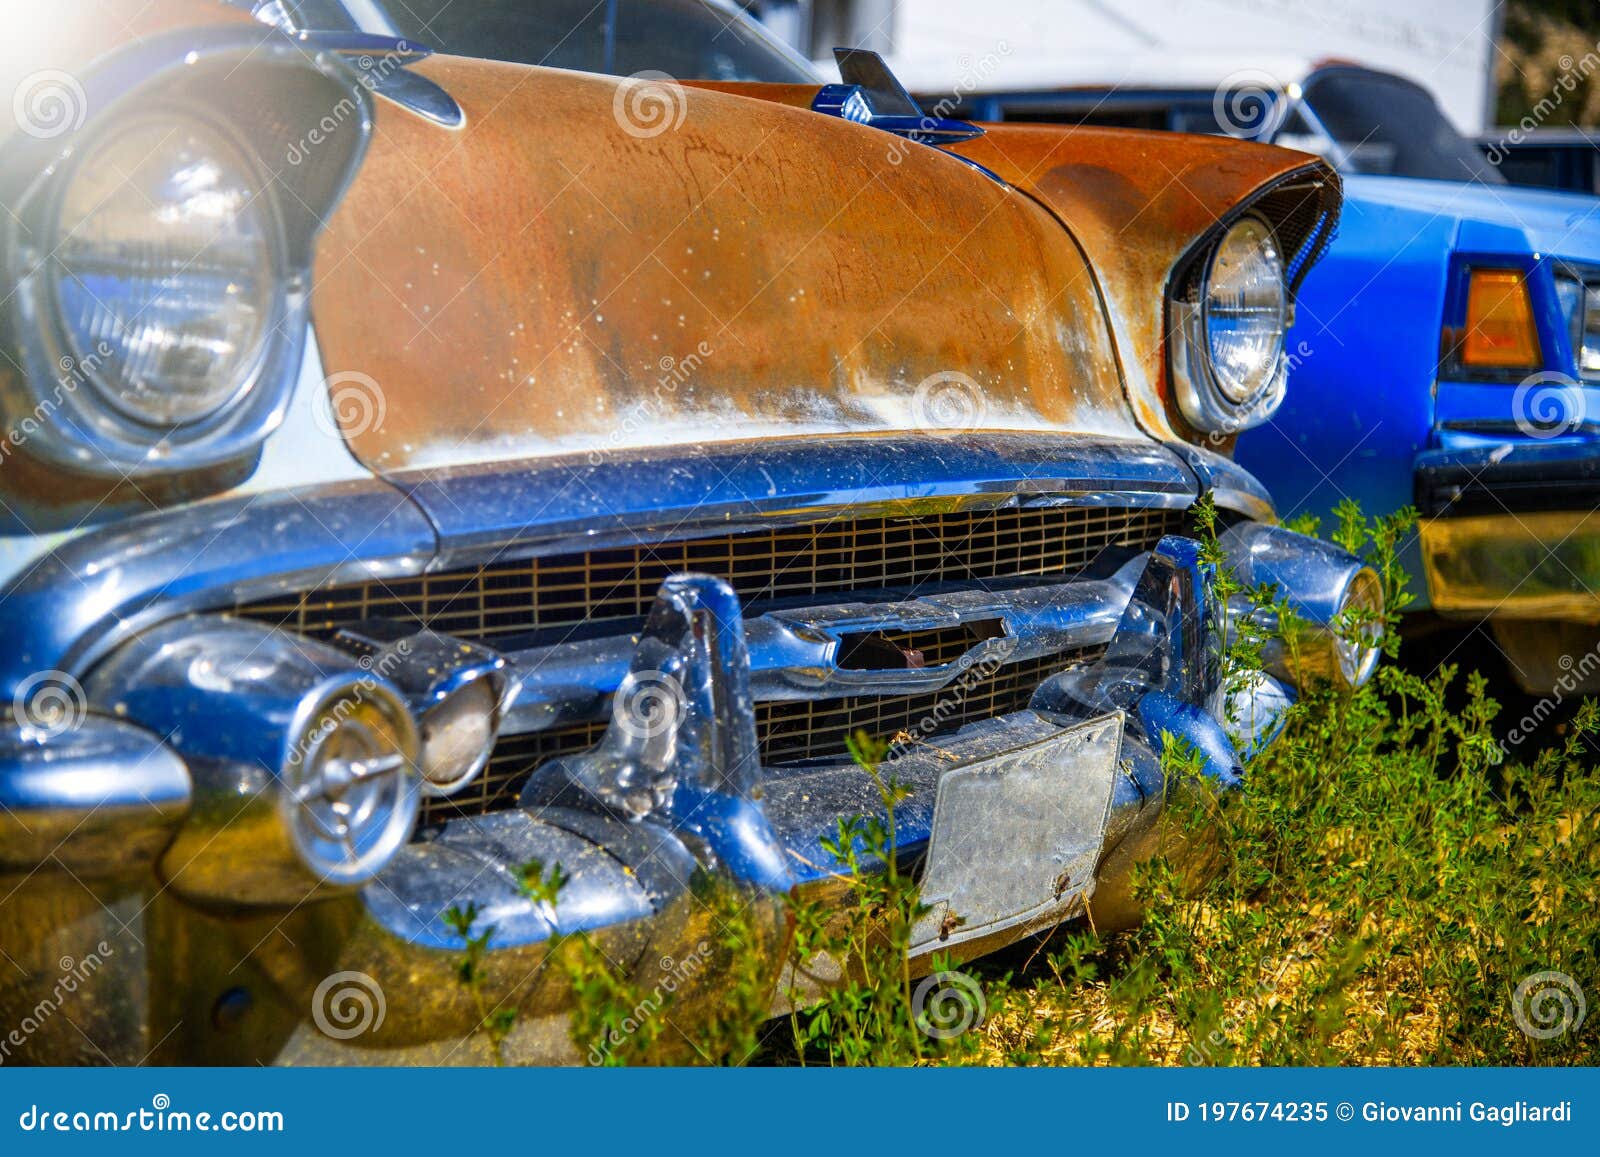 https://thumbs.dreamstime.com/z/auto-parts-store-middle-desert-summer-season-old-automobiles-cars-wreckage-197674235.jpg